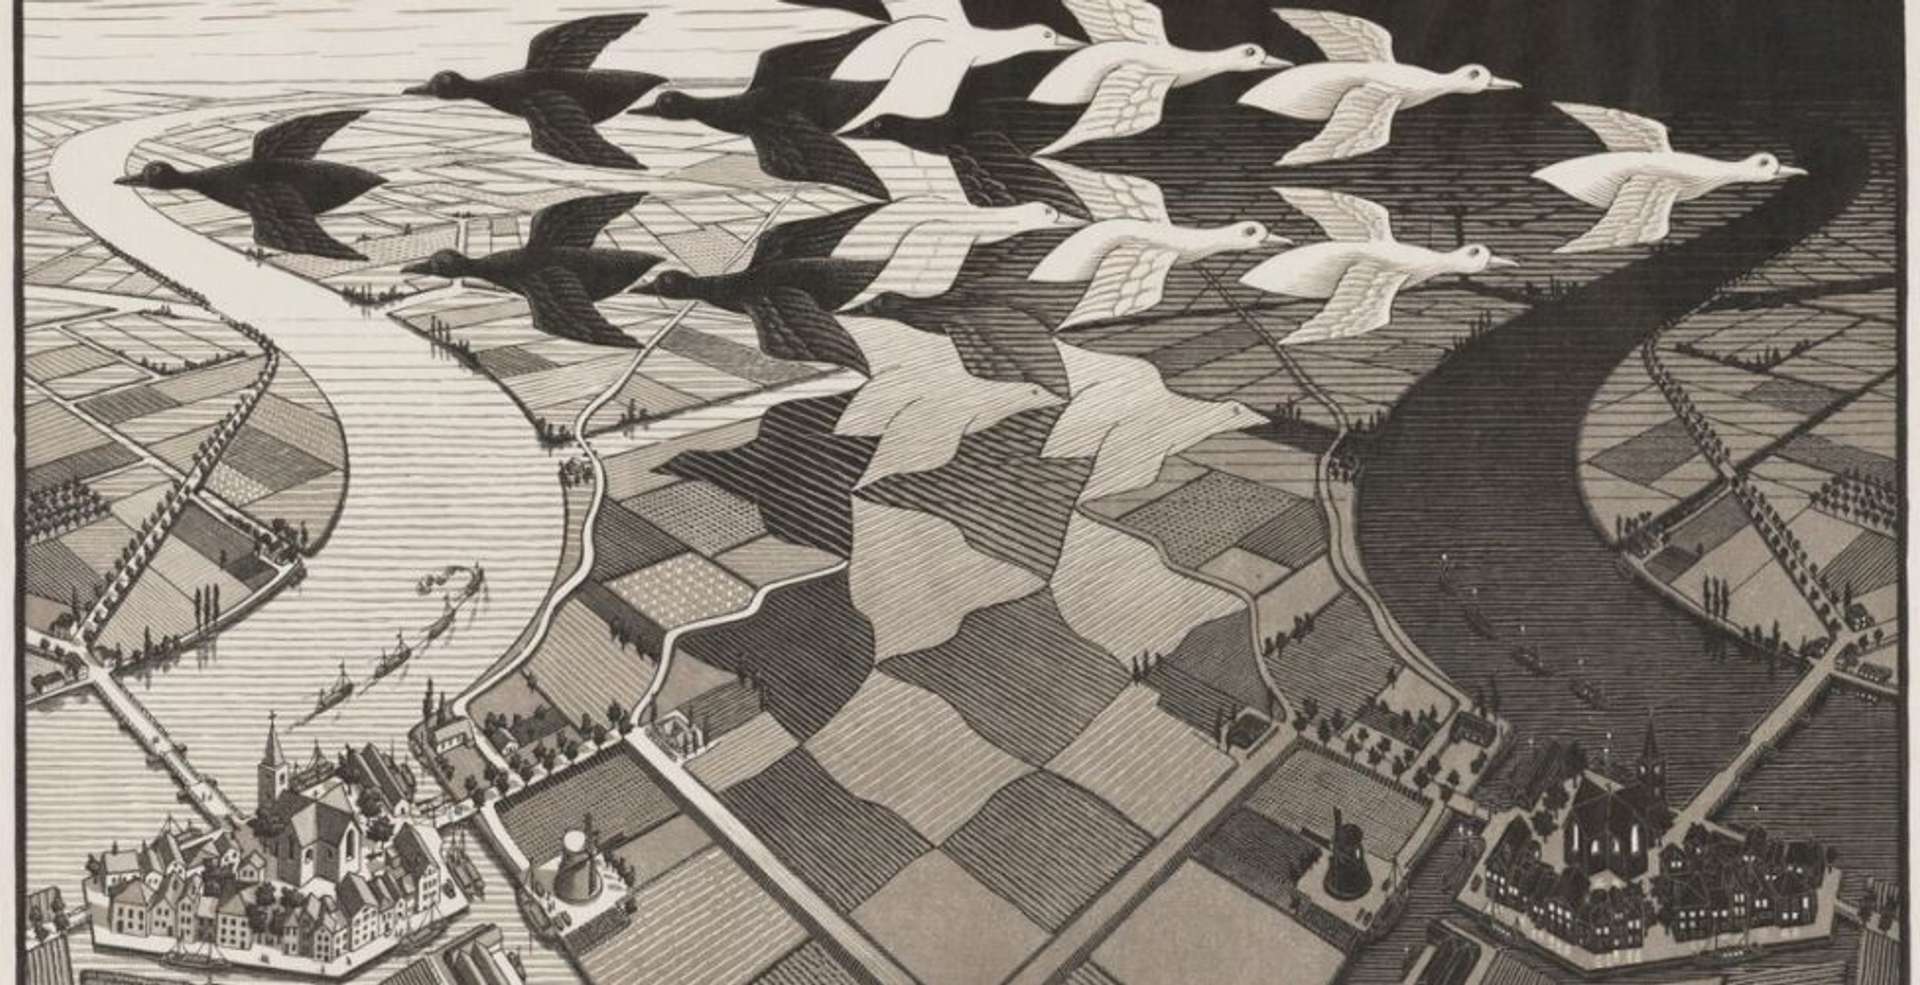 M.C. Escher’s Day & Night. A Modern Art woodcut black and grey print of black and white groups of birds flying away from each other overlooking a view of the city.